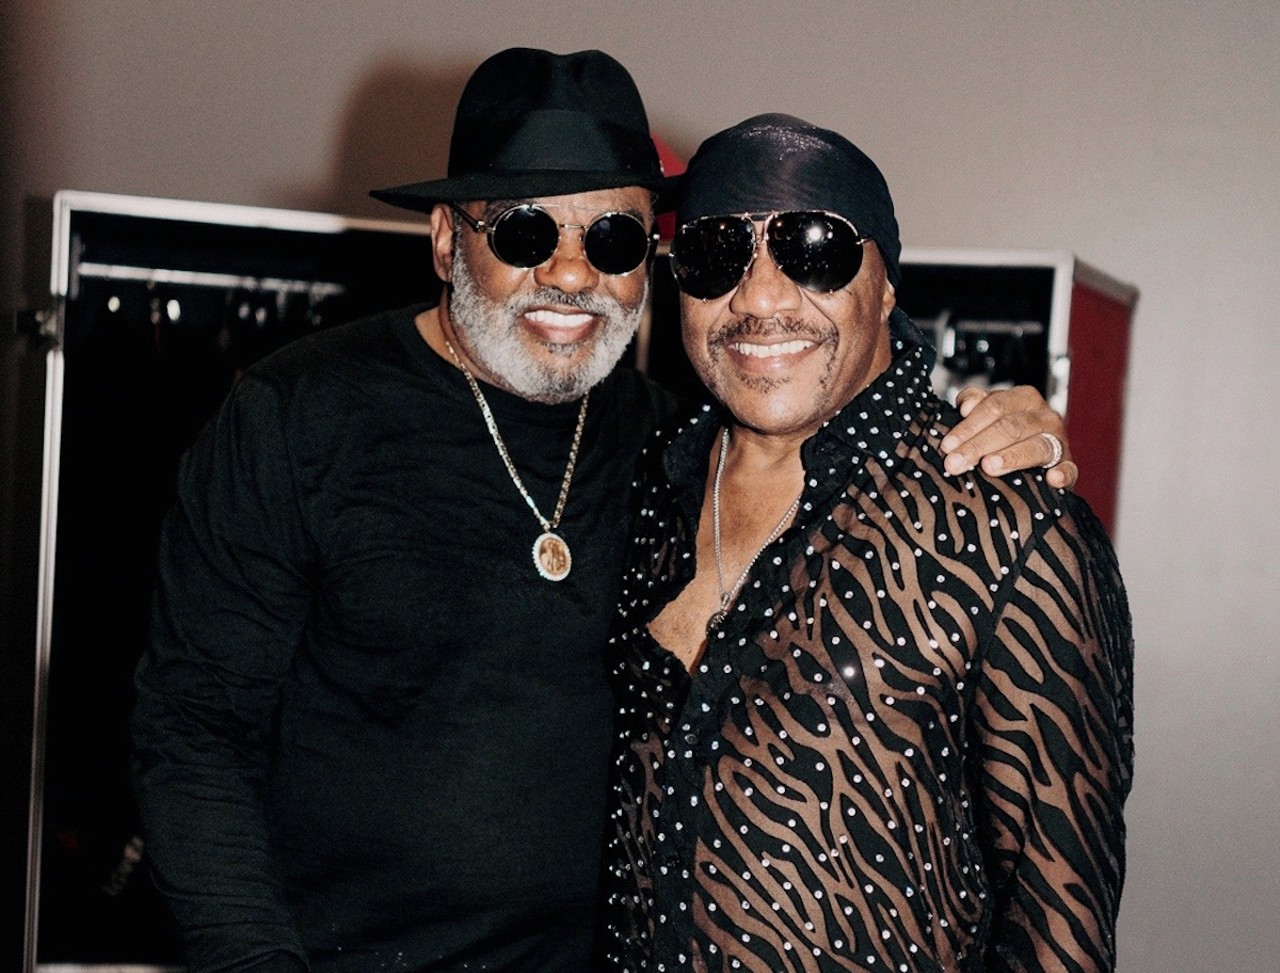 The Isley Brothers
In 1973, the younger Isley brothers Ernie and Marvin joined the band, along with brother-in-law Chris Jasper, contributing to some of the group's biggest hits, including “That Lady,” “Fight the Power” (which was later used in Public Enemy’s song of the same name) and “Summer Breeze.” Never afraid of adapting with the times, the band covered the spectrum of R&B music, incorporating disco in the late ‘70s and the slow jams of the ‘90s, as well as soul and funk.
The Isley Brothers have won several Grammys throughout their six-decade-long career, including a Lifetime Achievement Grammy in 2014. They were also inducted into the Rock & Roll Hall of Fame in 1992. And today, you can still see Ron and Ernie Isley on tour. In 2022, the brothers released the album Make Me Say it Again, Girl with collaborations from Beyoncé, Earth, Wind & Fire, El DeBarge and Snoop Dogg. And in Pendleton, you can visit the mural dedicated to the Cincinnati natives, inscribed with their lyrics “It’s Your Thing, Do What You Want to Do.”
Information gathered from www.officialisleybrothers.com.